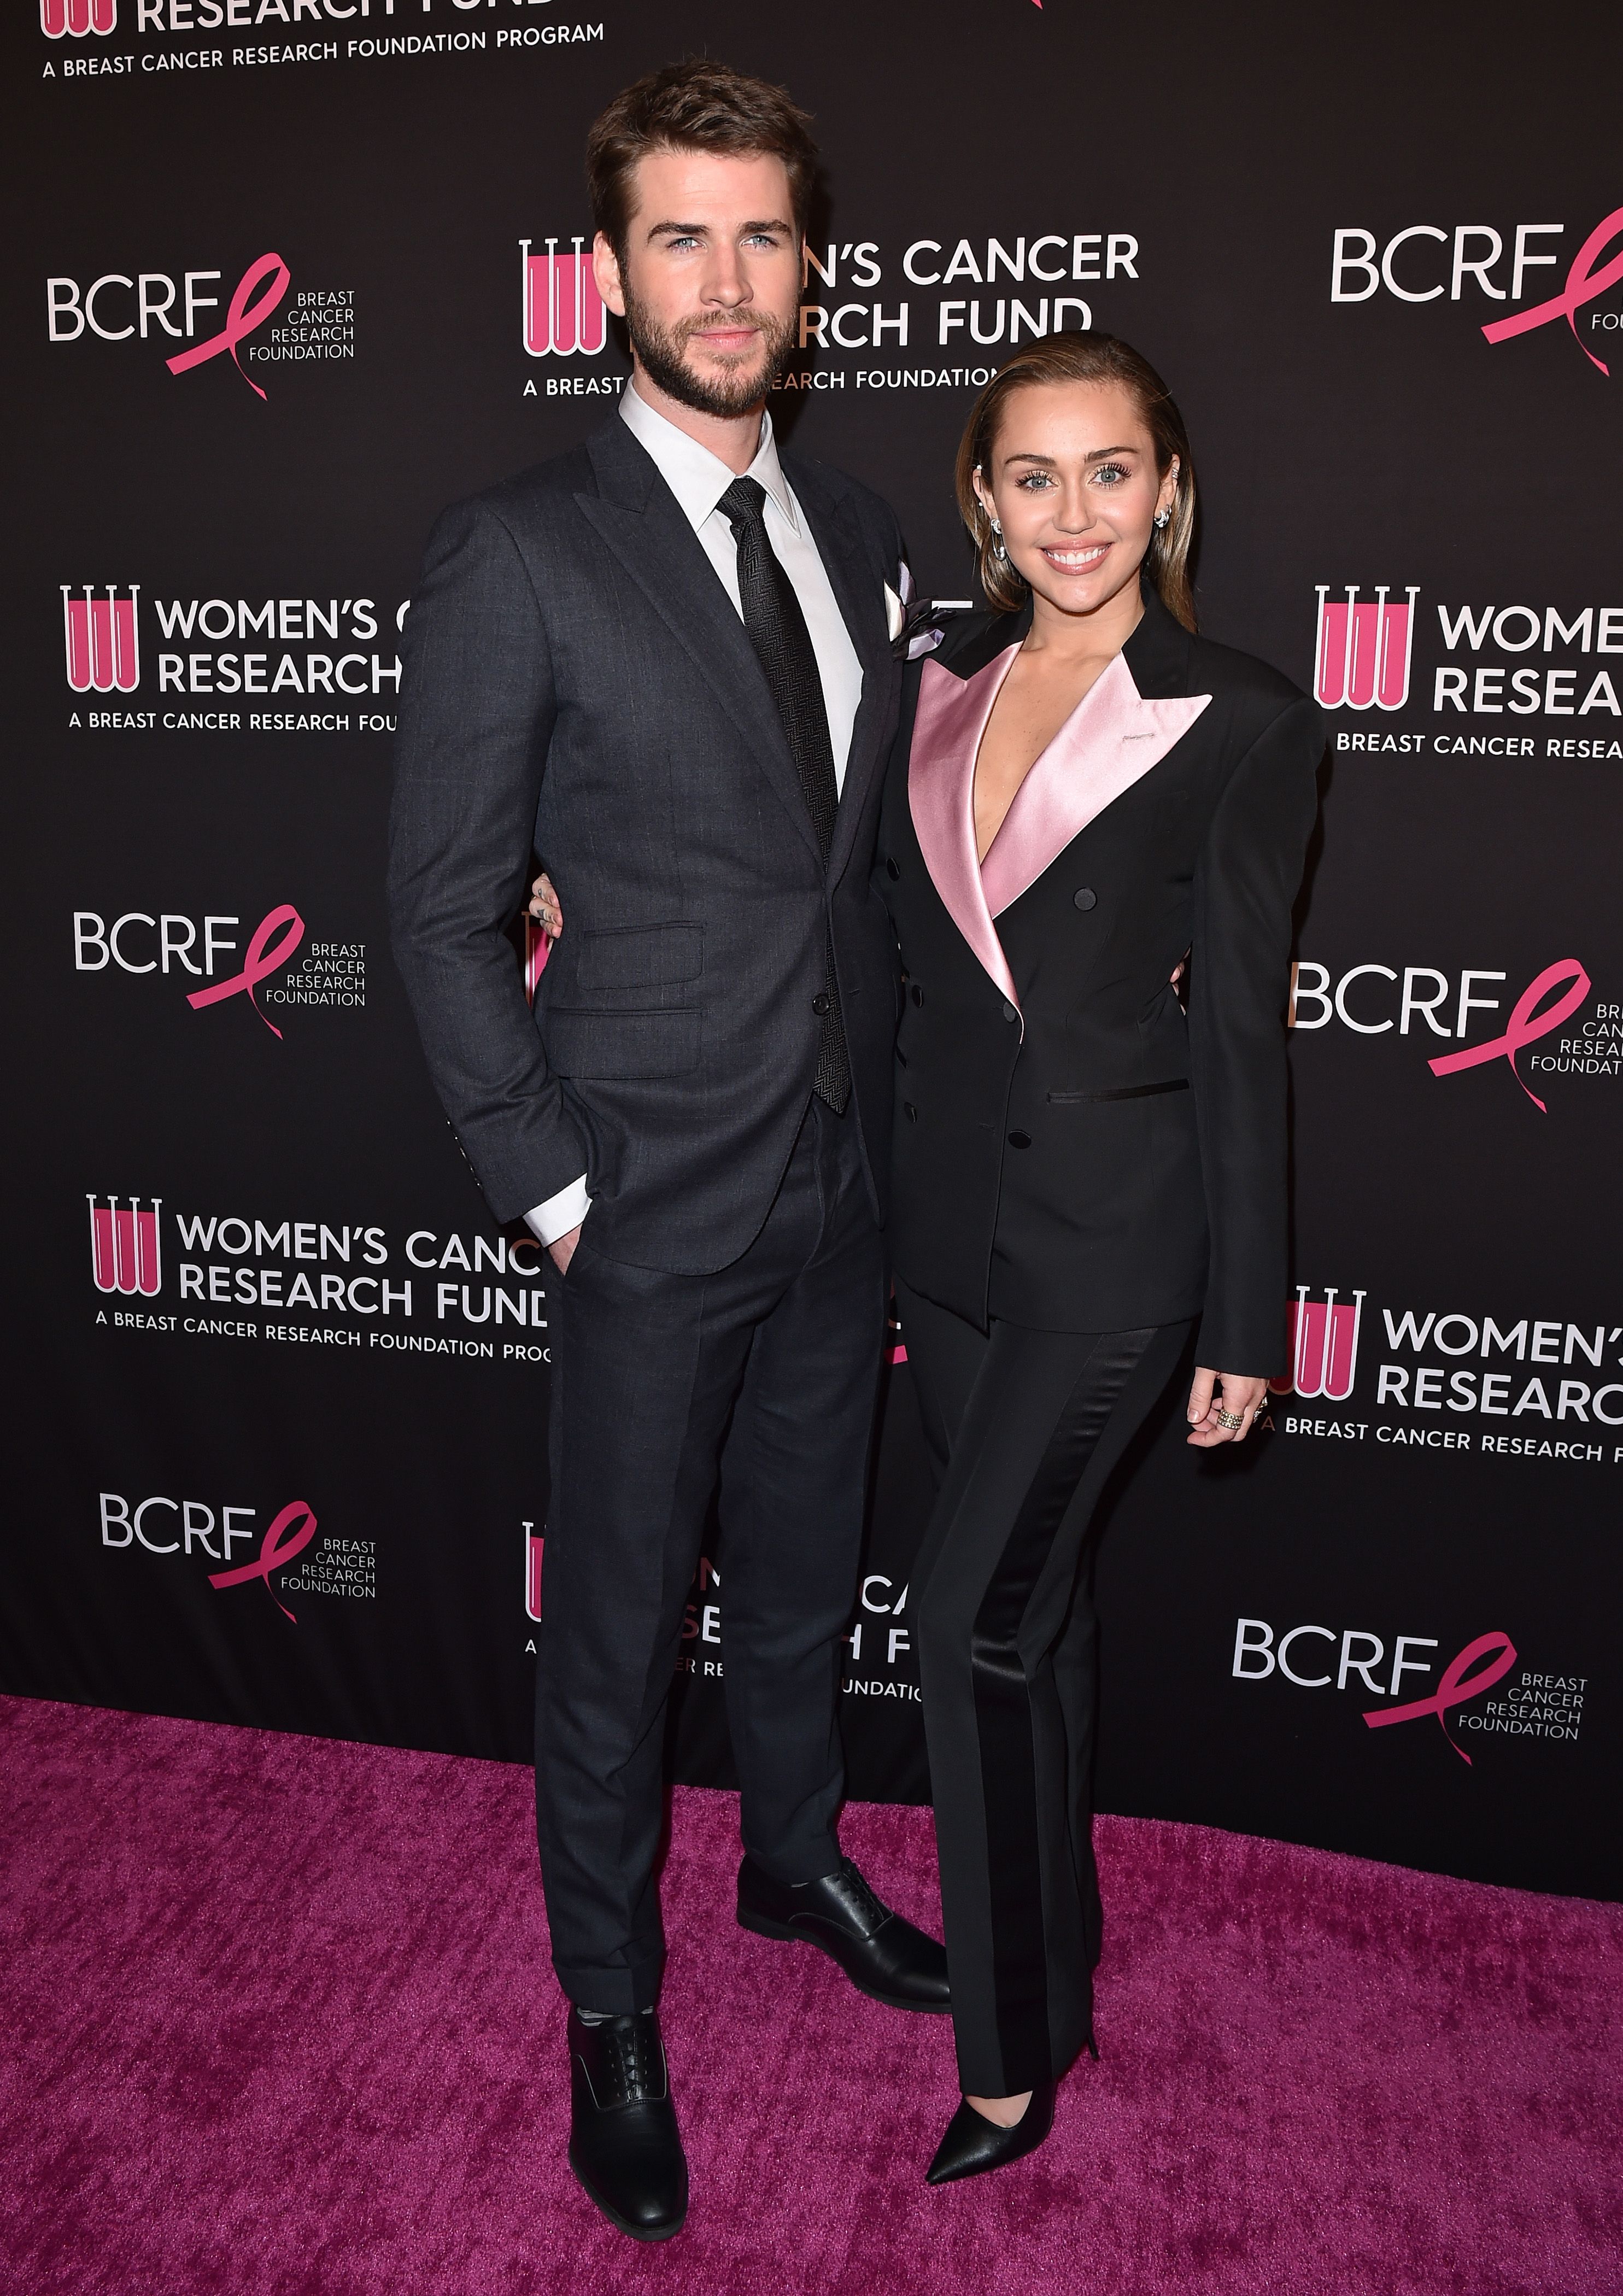 24 Celebrity Couples With a Major Height Difference